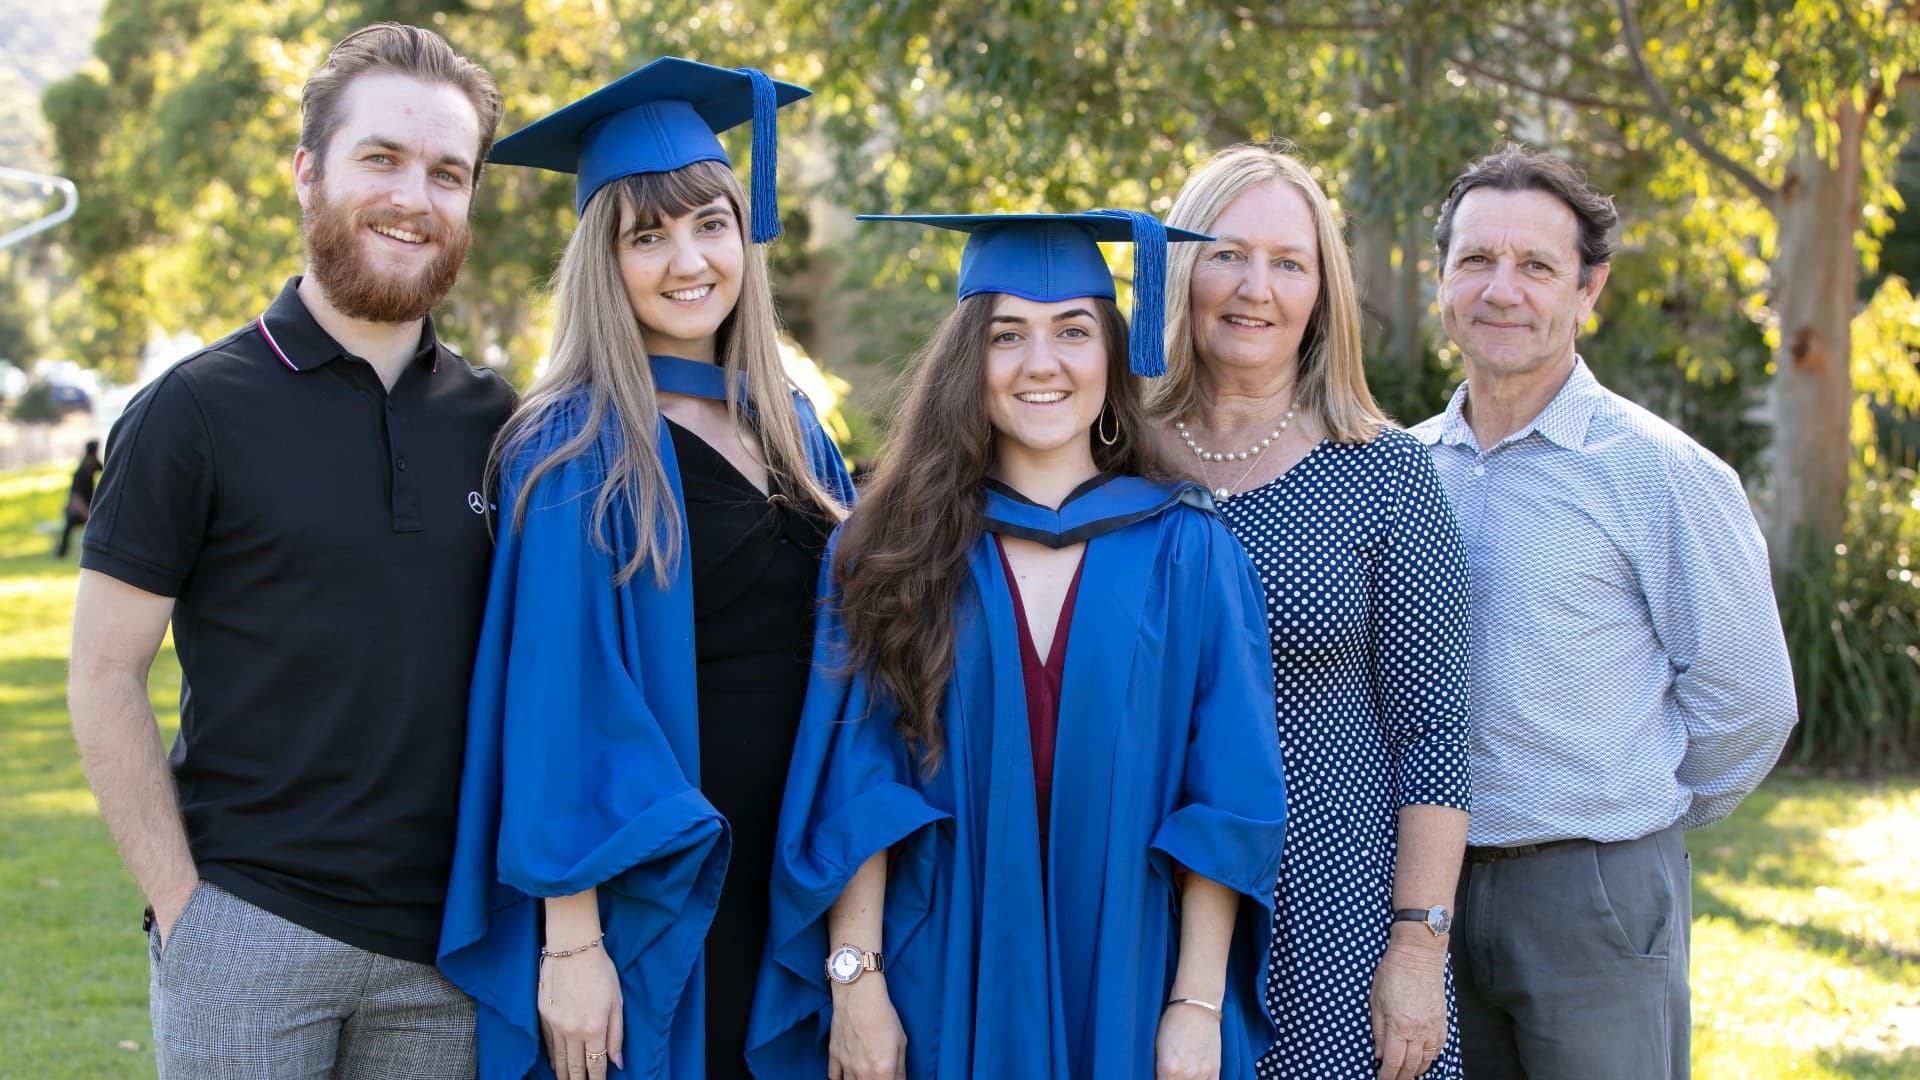 Brenna and Bronte Petrolo, both pictured in their graduation gowns, with their families. Photo: Mark Newsham